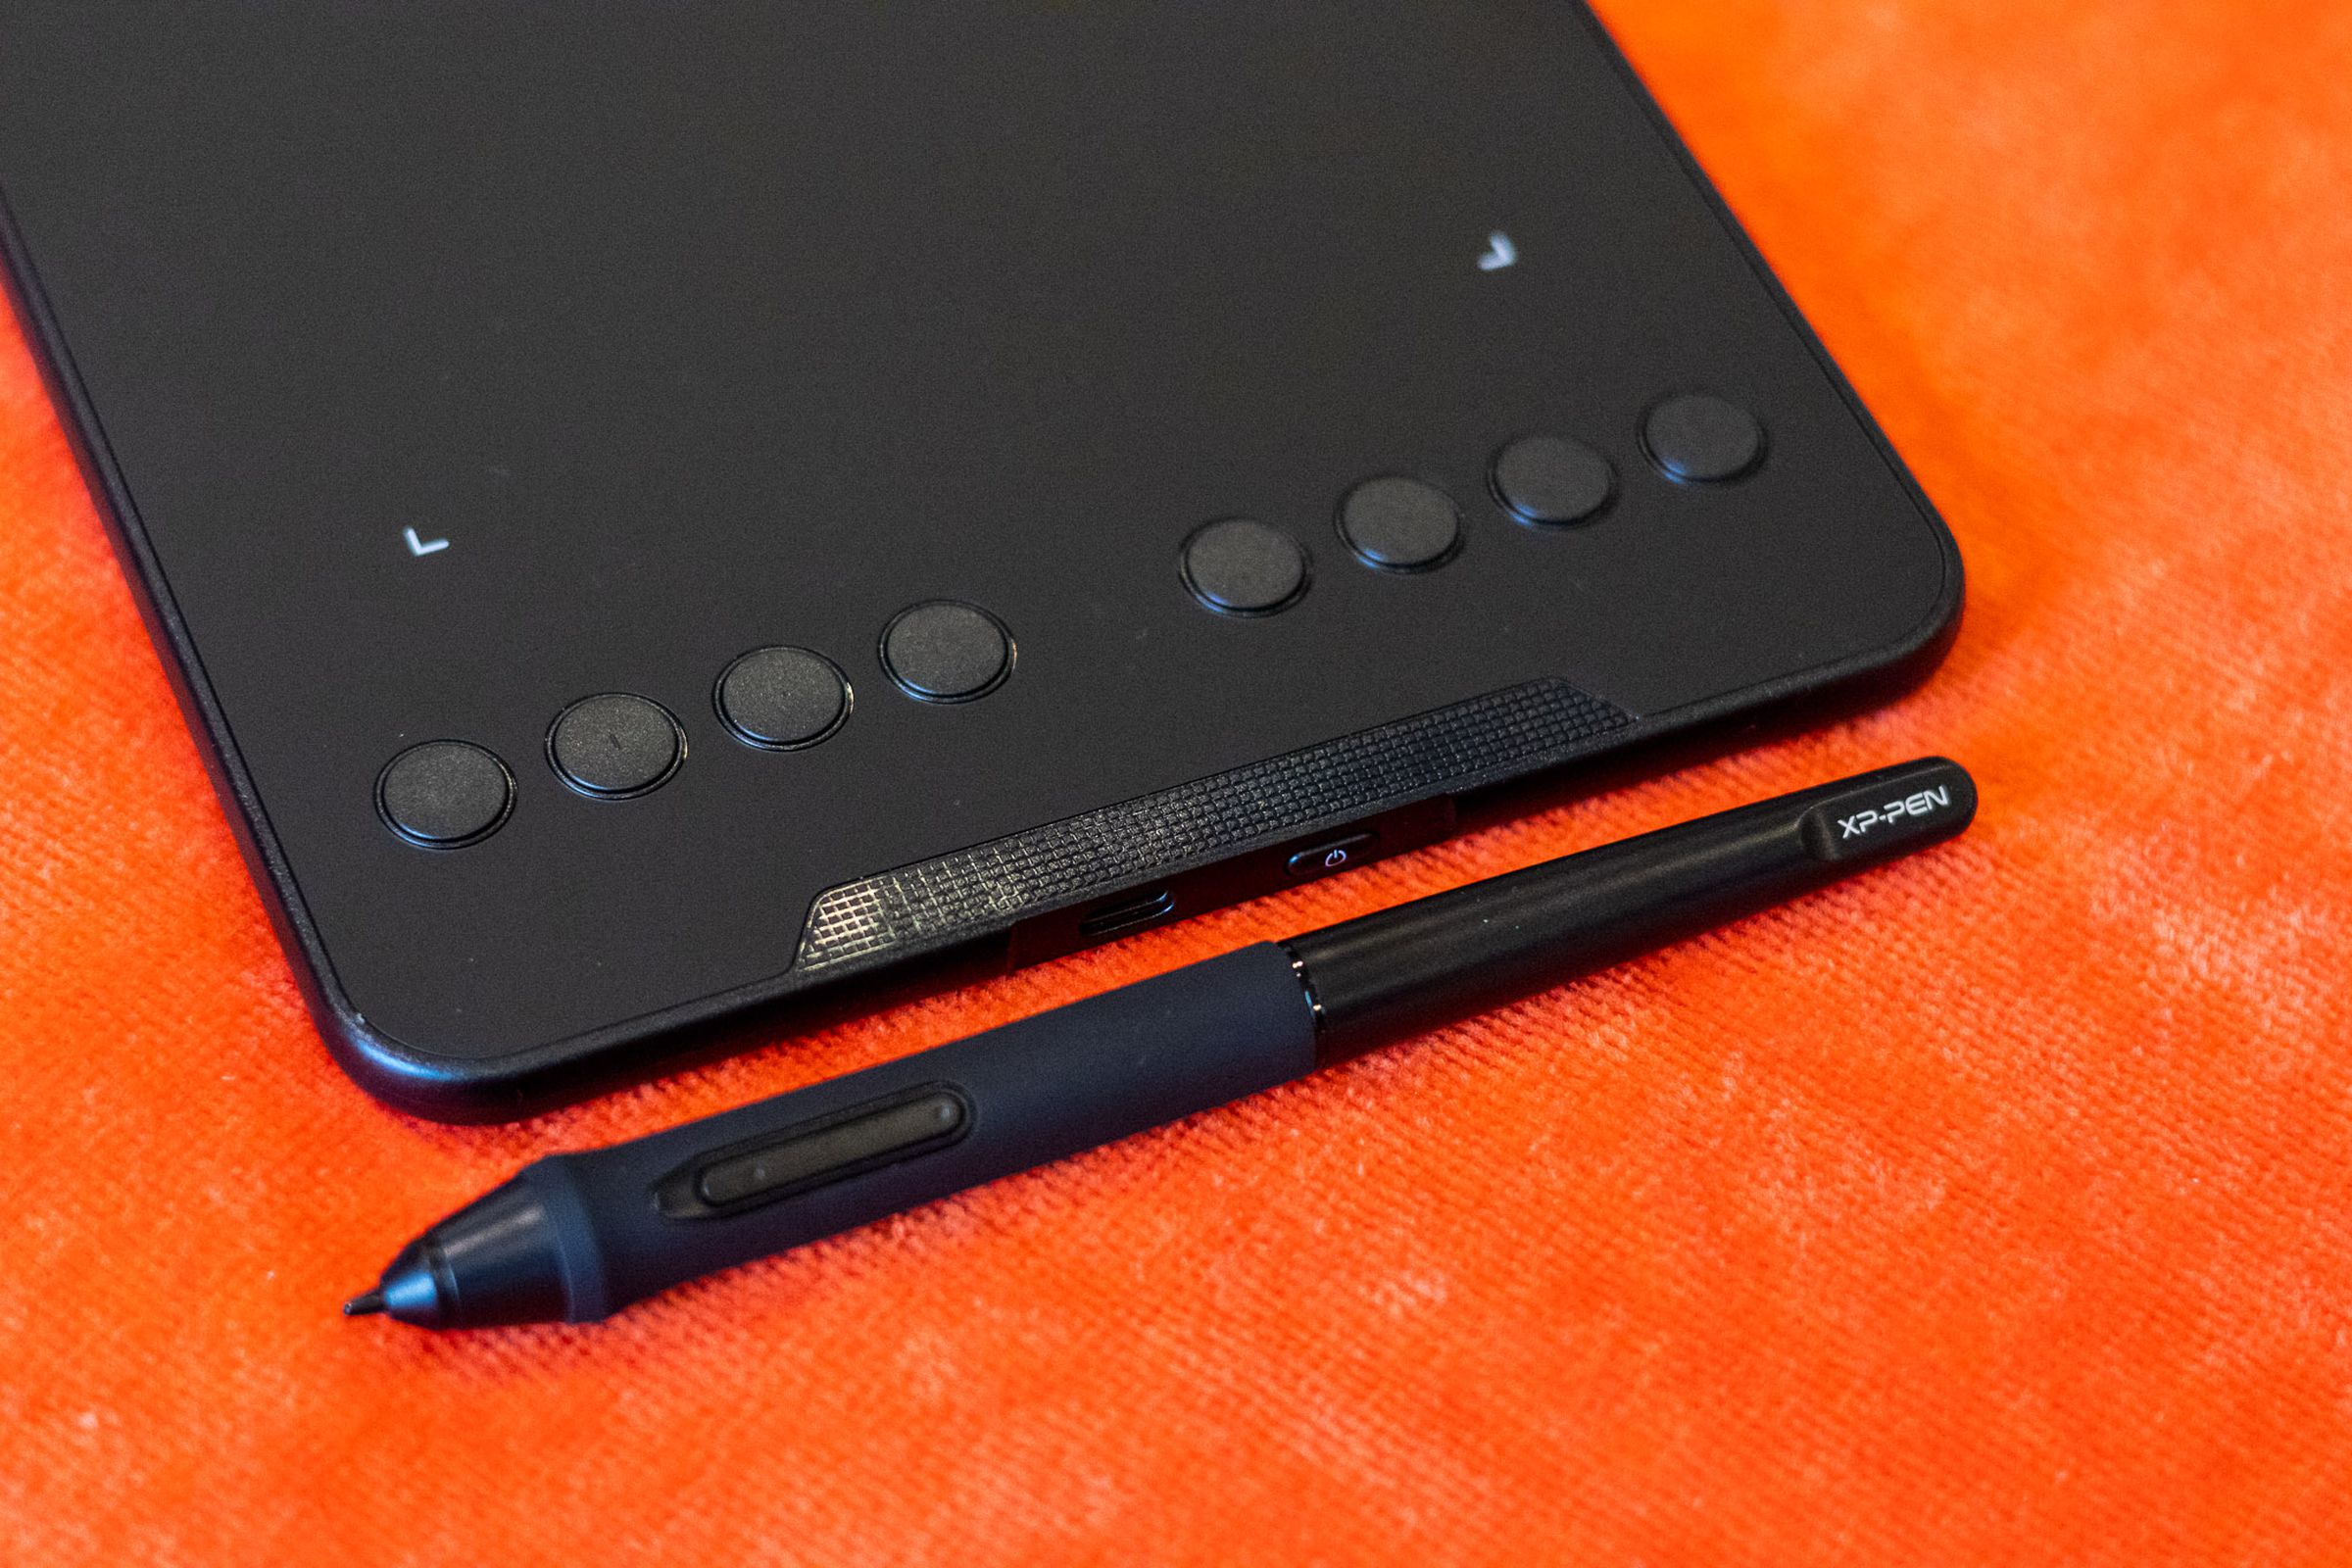 A close-up shot of the XP-Pen Deco Mini 7 buttons and stylus